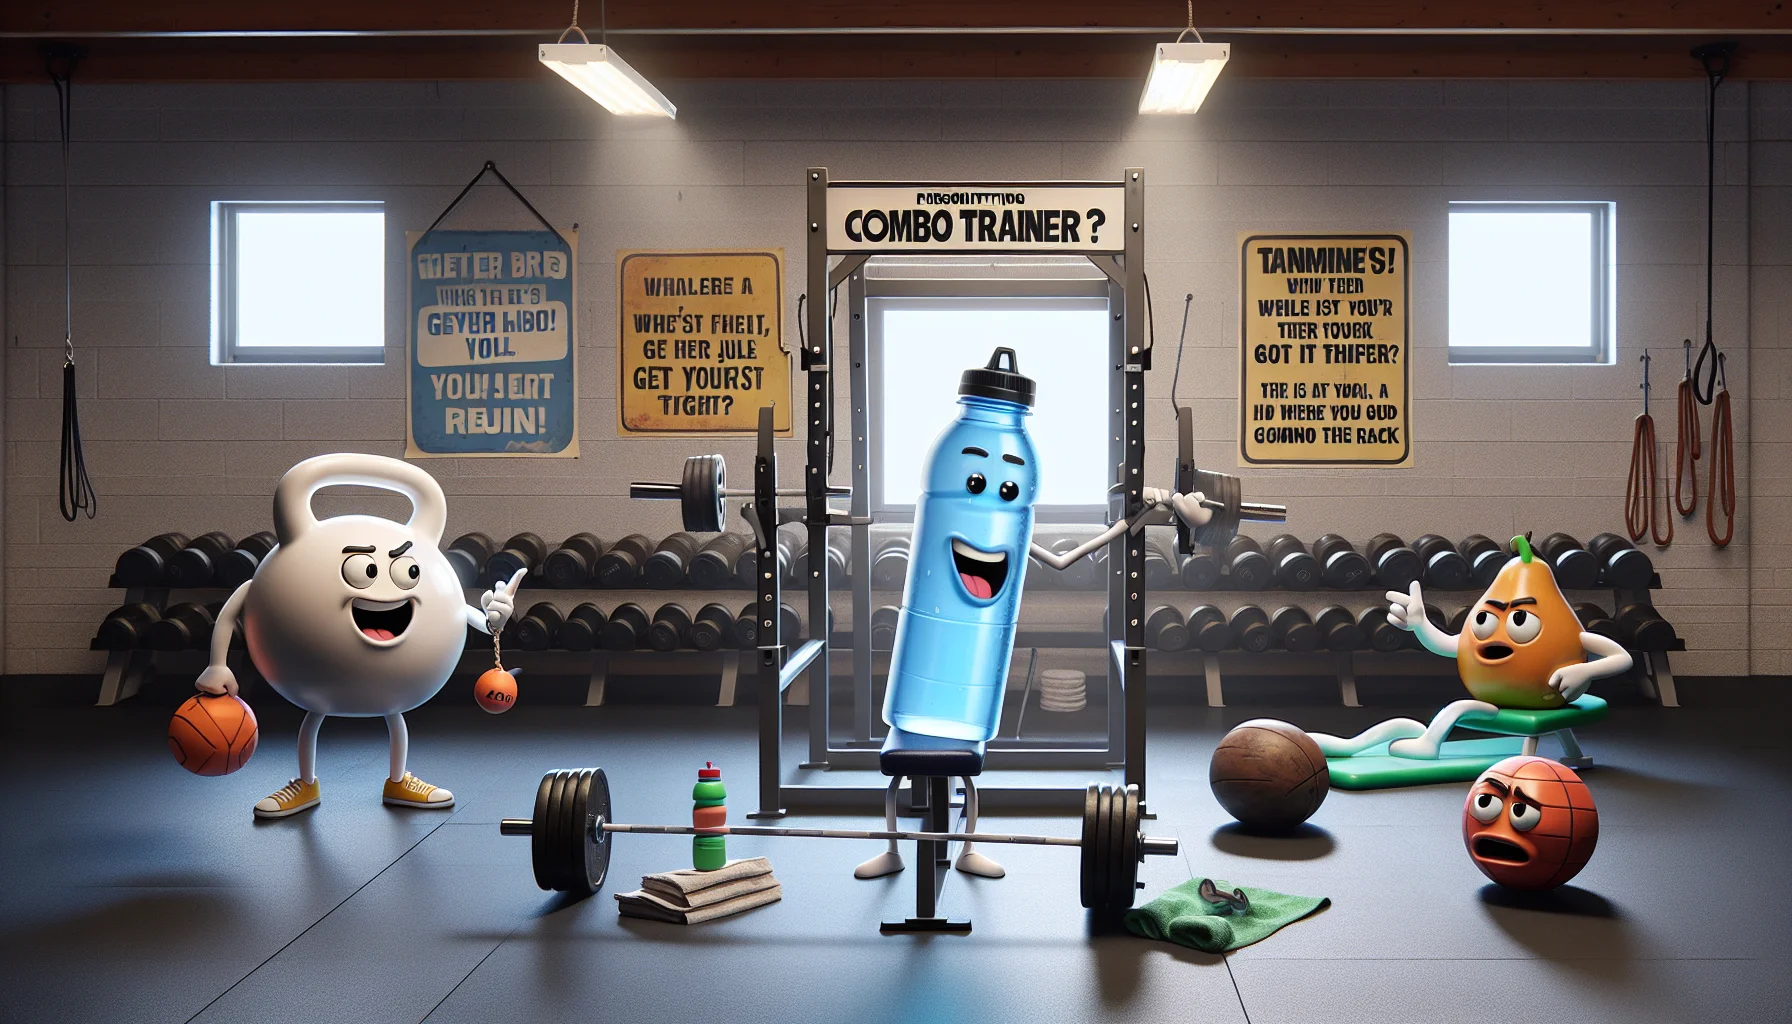 Imagine a humorous scenario taking place at a gym. Centered in the room is a powerlifting combo rack, gleaming under the fluorescent lights. On one side you see an anthropomorphized kettlebell wearing a personal trainer's whistle encouraging a terrified barbell to get onto the rack. On the other side, an animated water bottle, with sunglasses on, is lazily lounging, tanning under the gym lights, pointing towards the combo rack with a smirk. The backdrop of the room is filled with motivational posters with funny catchphrases enticing everyone to exercise.